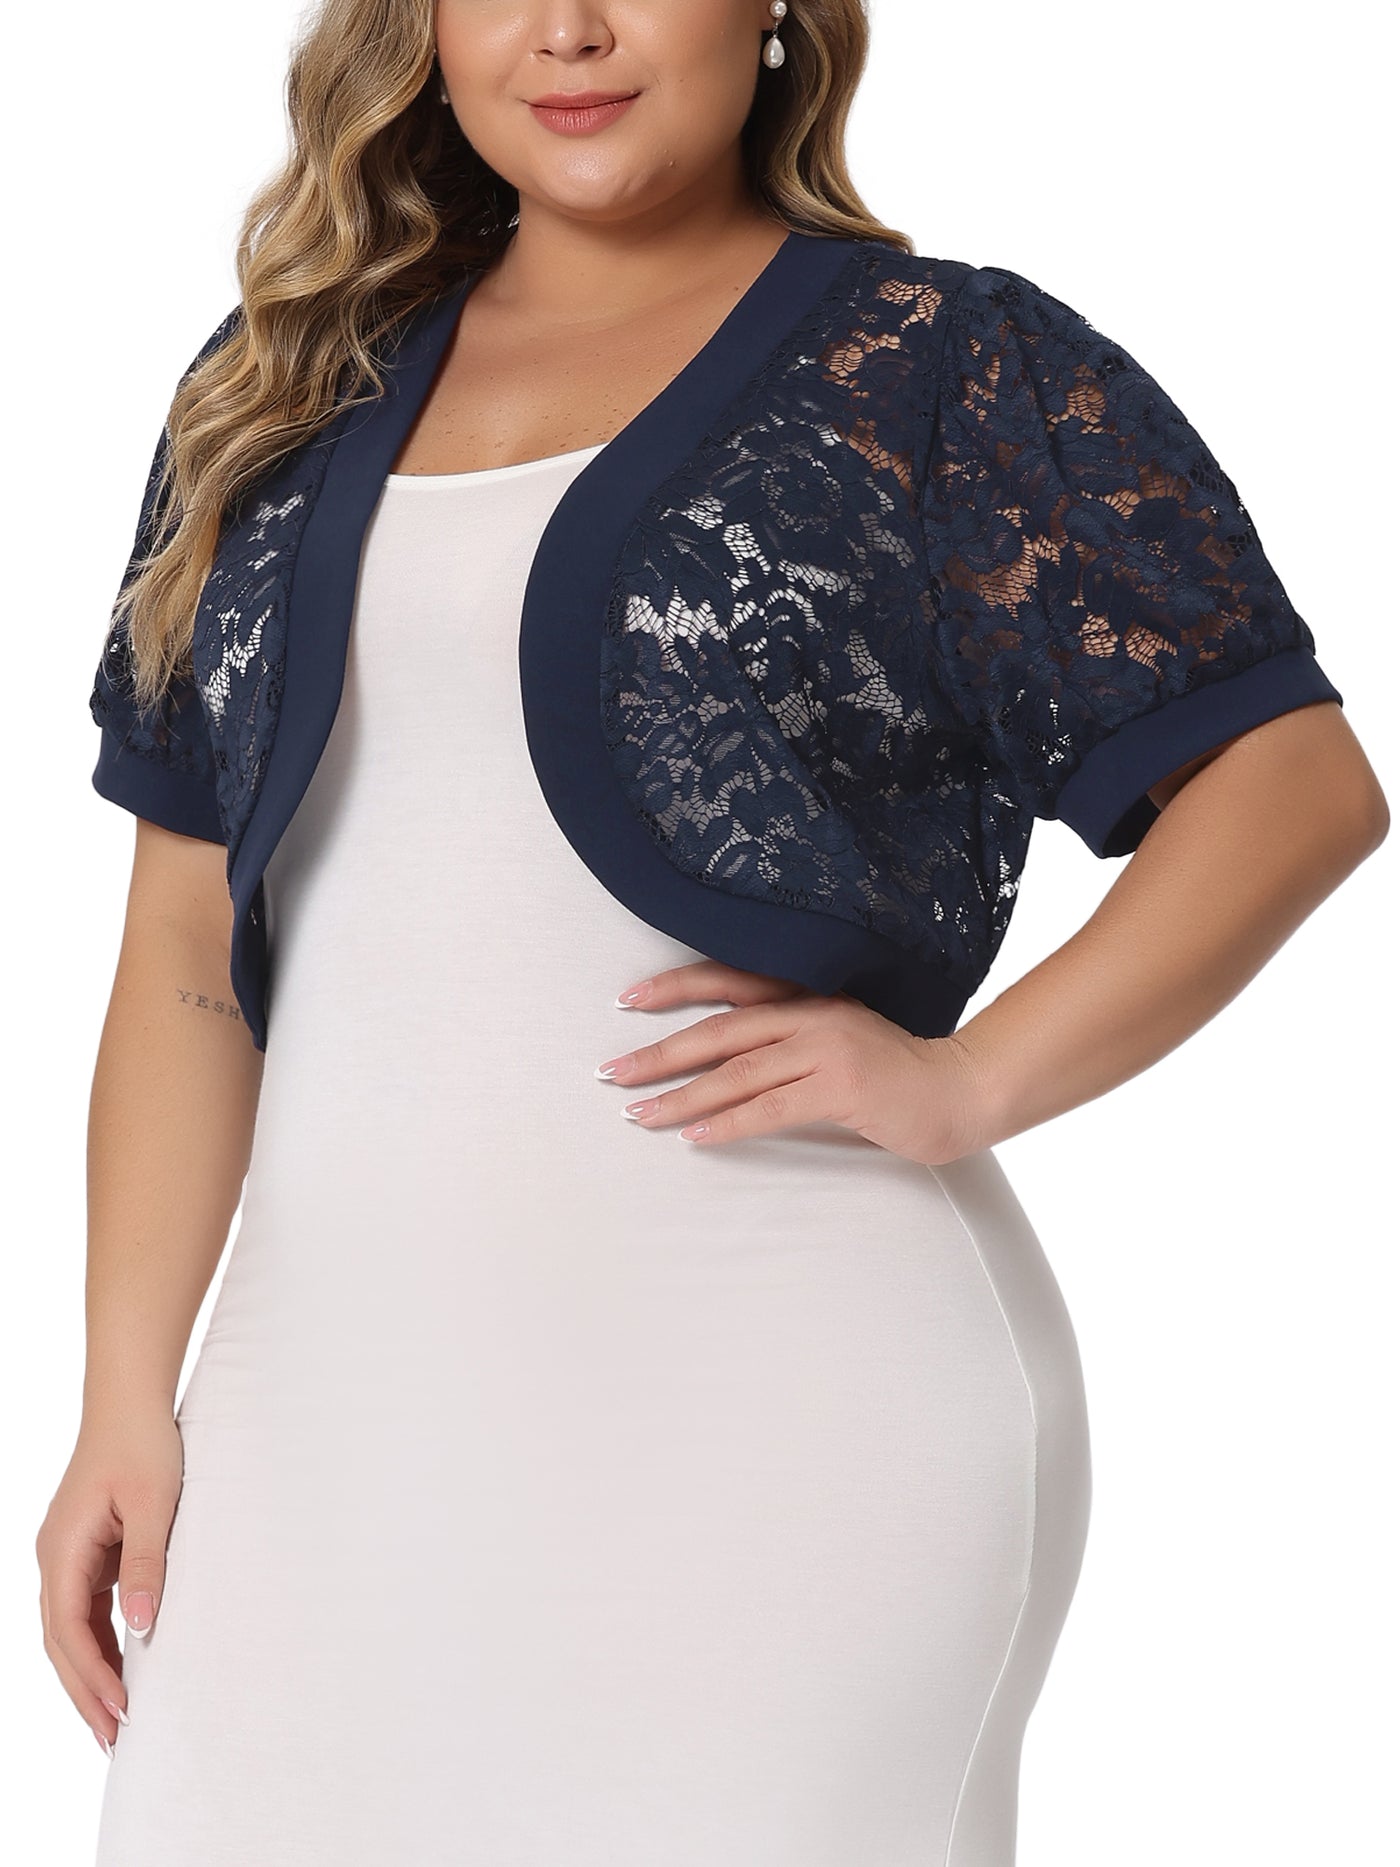 Bublédon Plus Size Cardigan for Women Short Sleeve Sheer Floral Lace Bolero Shrugs Open Front Cropped Cardigans